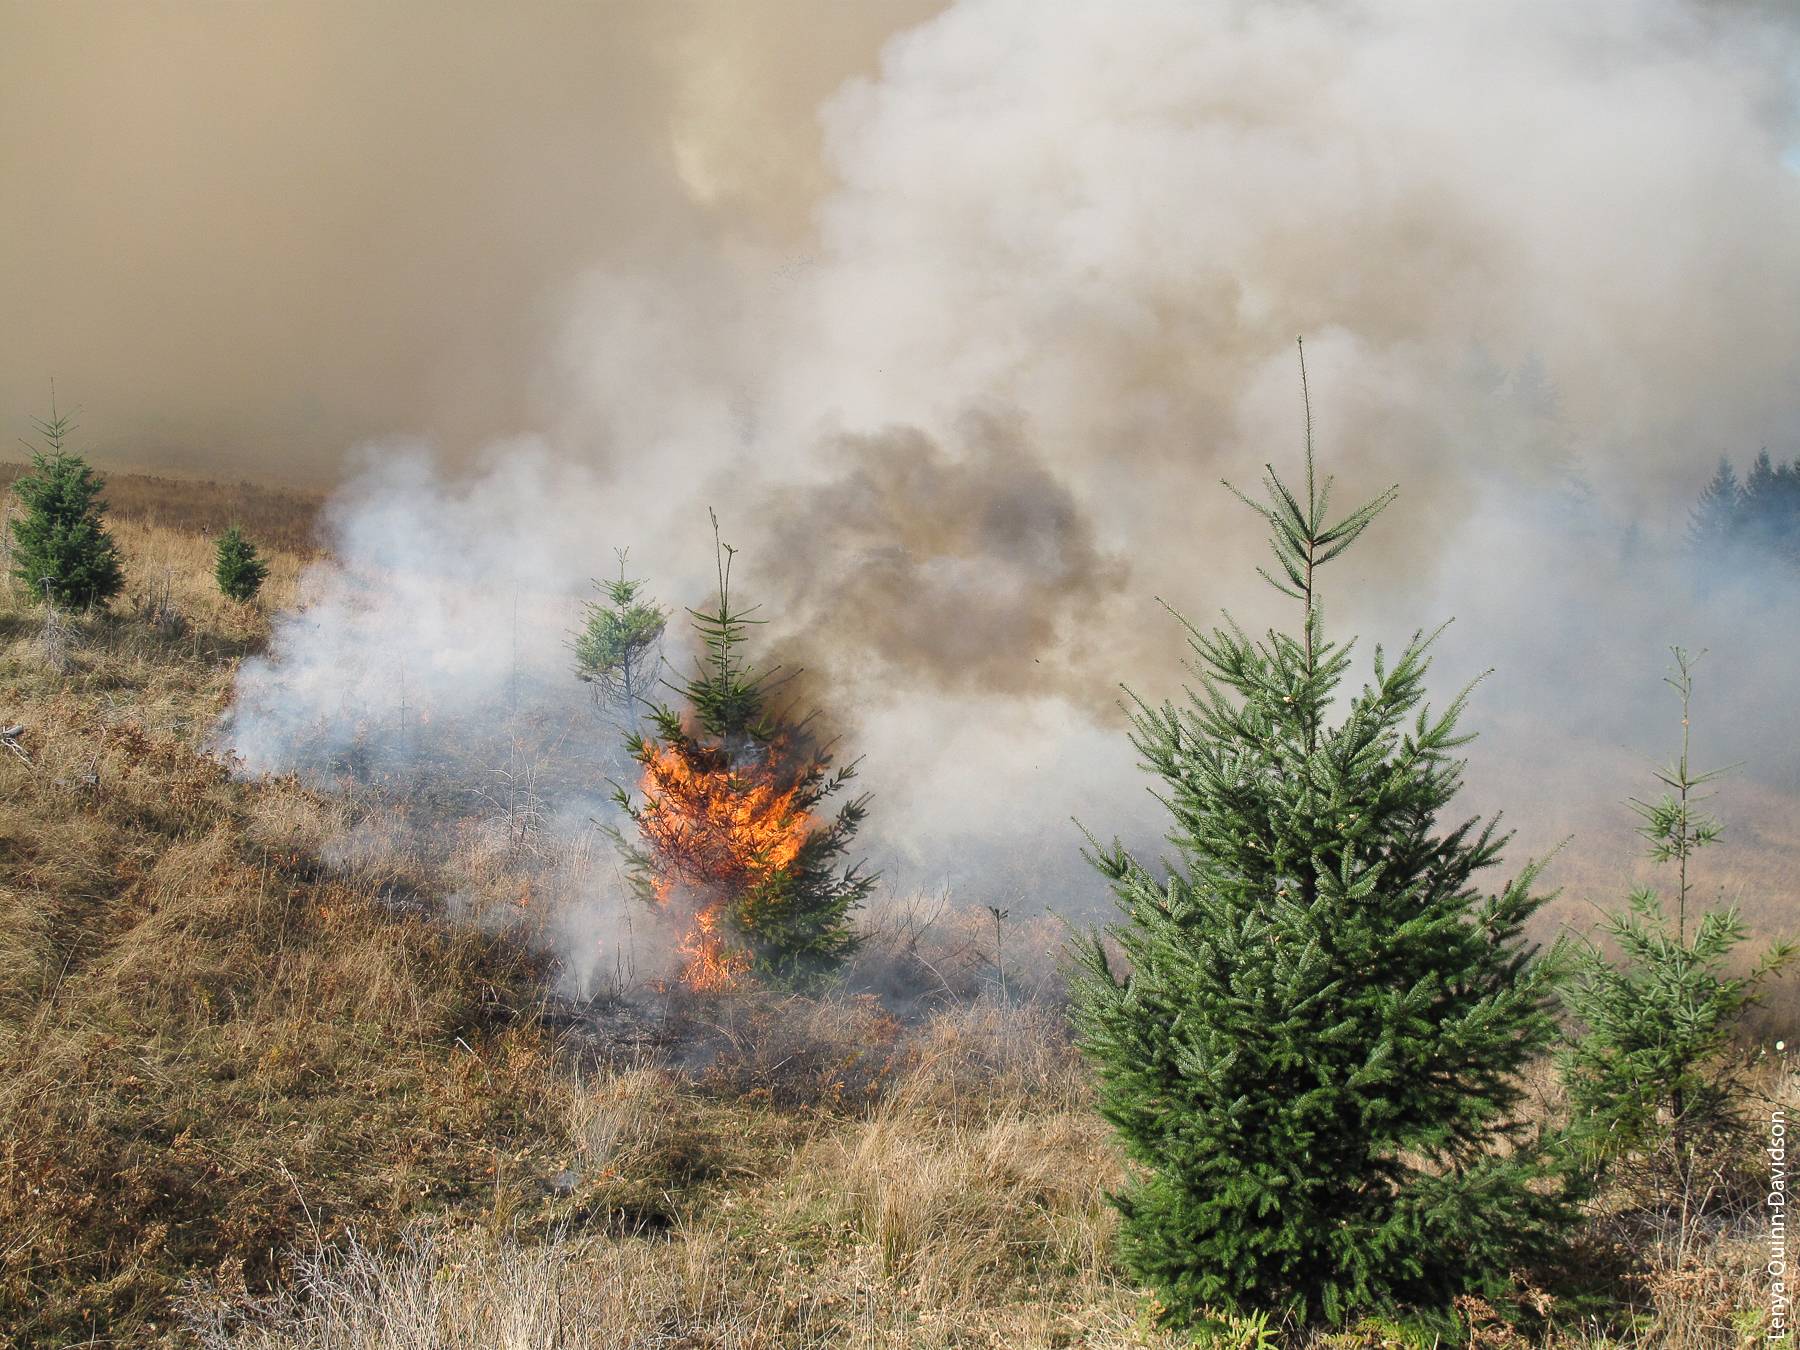 Prescribed fire can help to stop the spread of Douglas fir trees into open oak woodlands, as in this burn in Redwood National Park. But Douglas fir become more fire resistant as they mature.